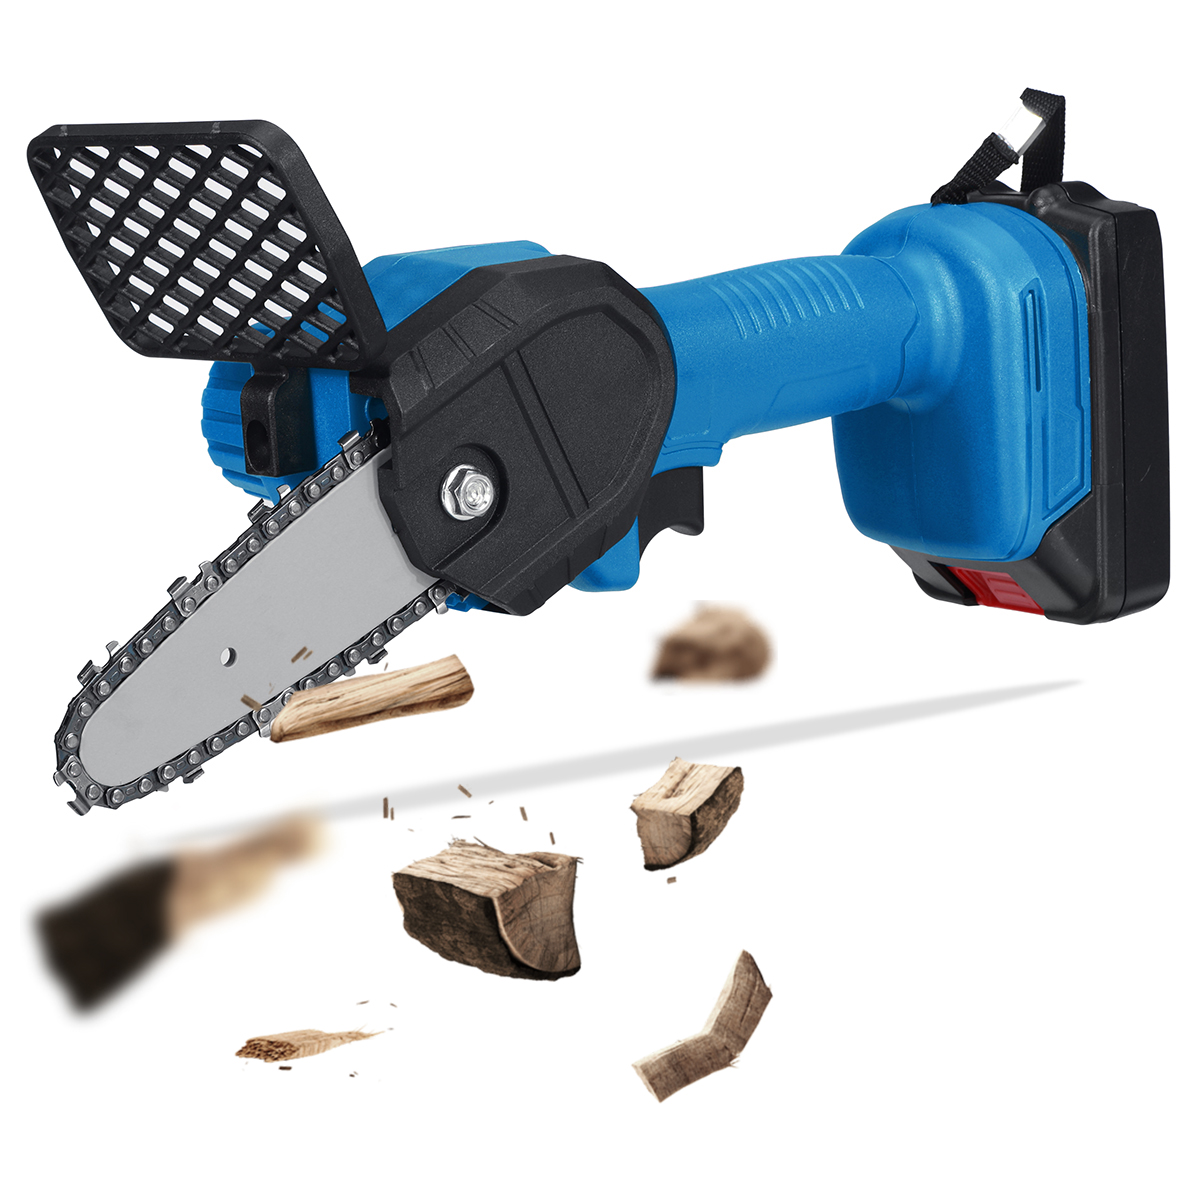 4-Inch-600W-88VF-Cordless-Electric-Chain-Saw-One-Hand-Cutter-Woodworking-ChainSaw-W-12-Battery-1874432-8